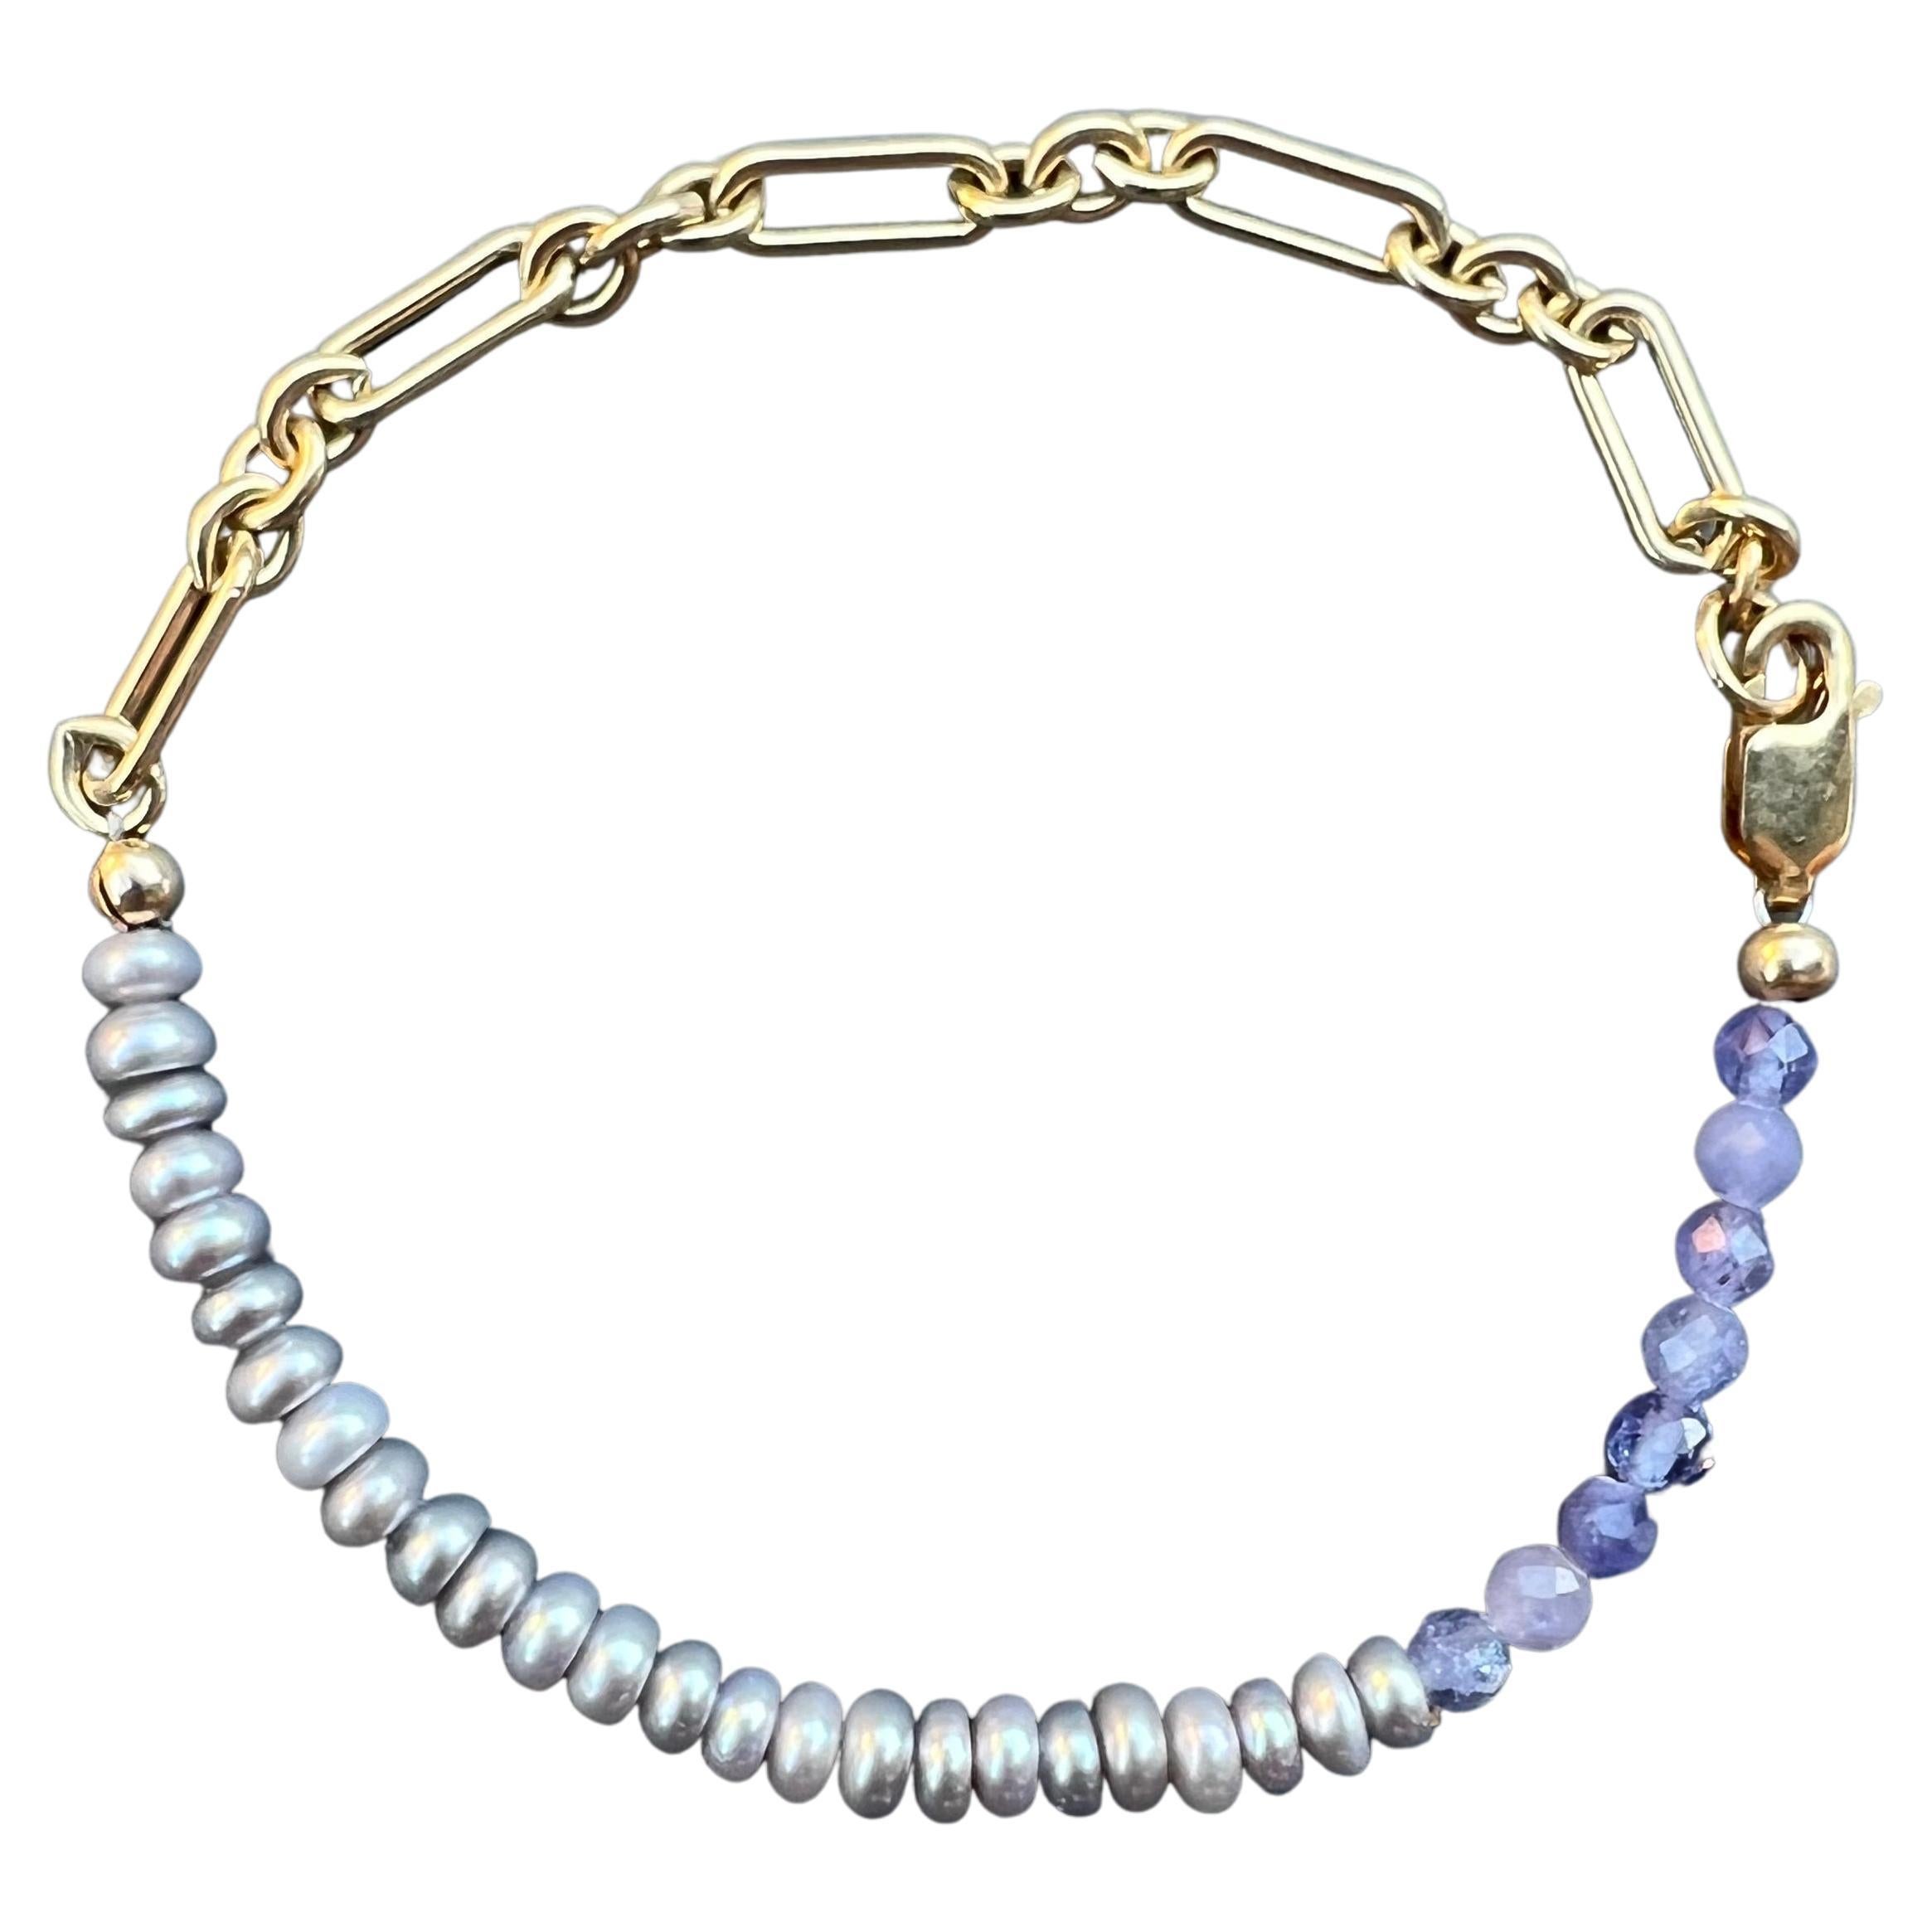 Pearl Tanzanite Ankle Bracelet Beaded Gold Filled Chain J Dauphin